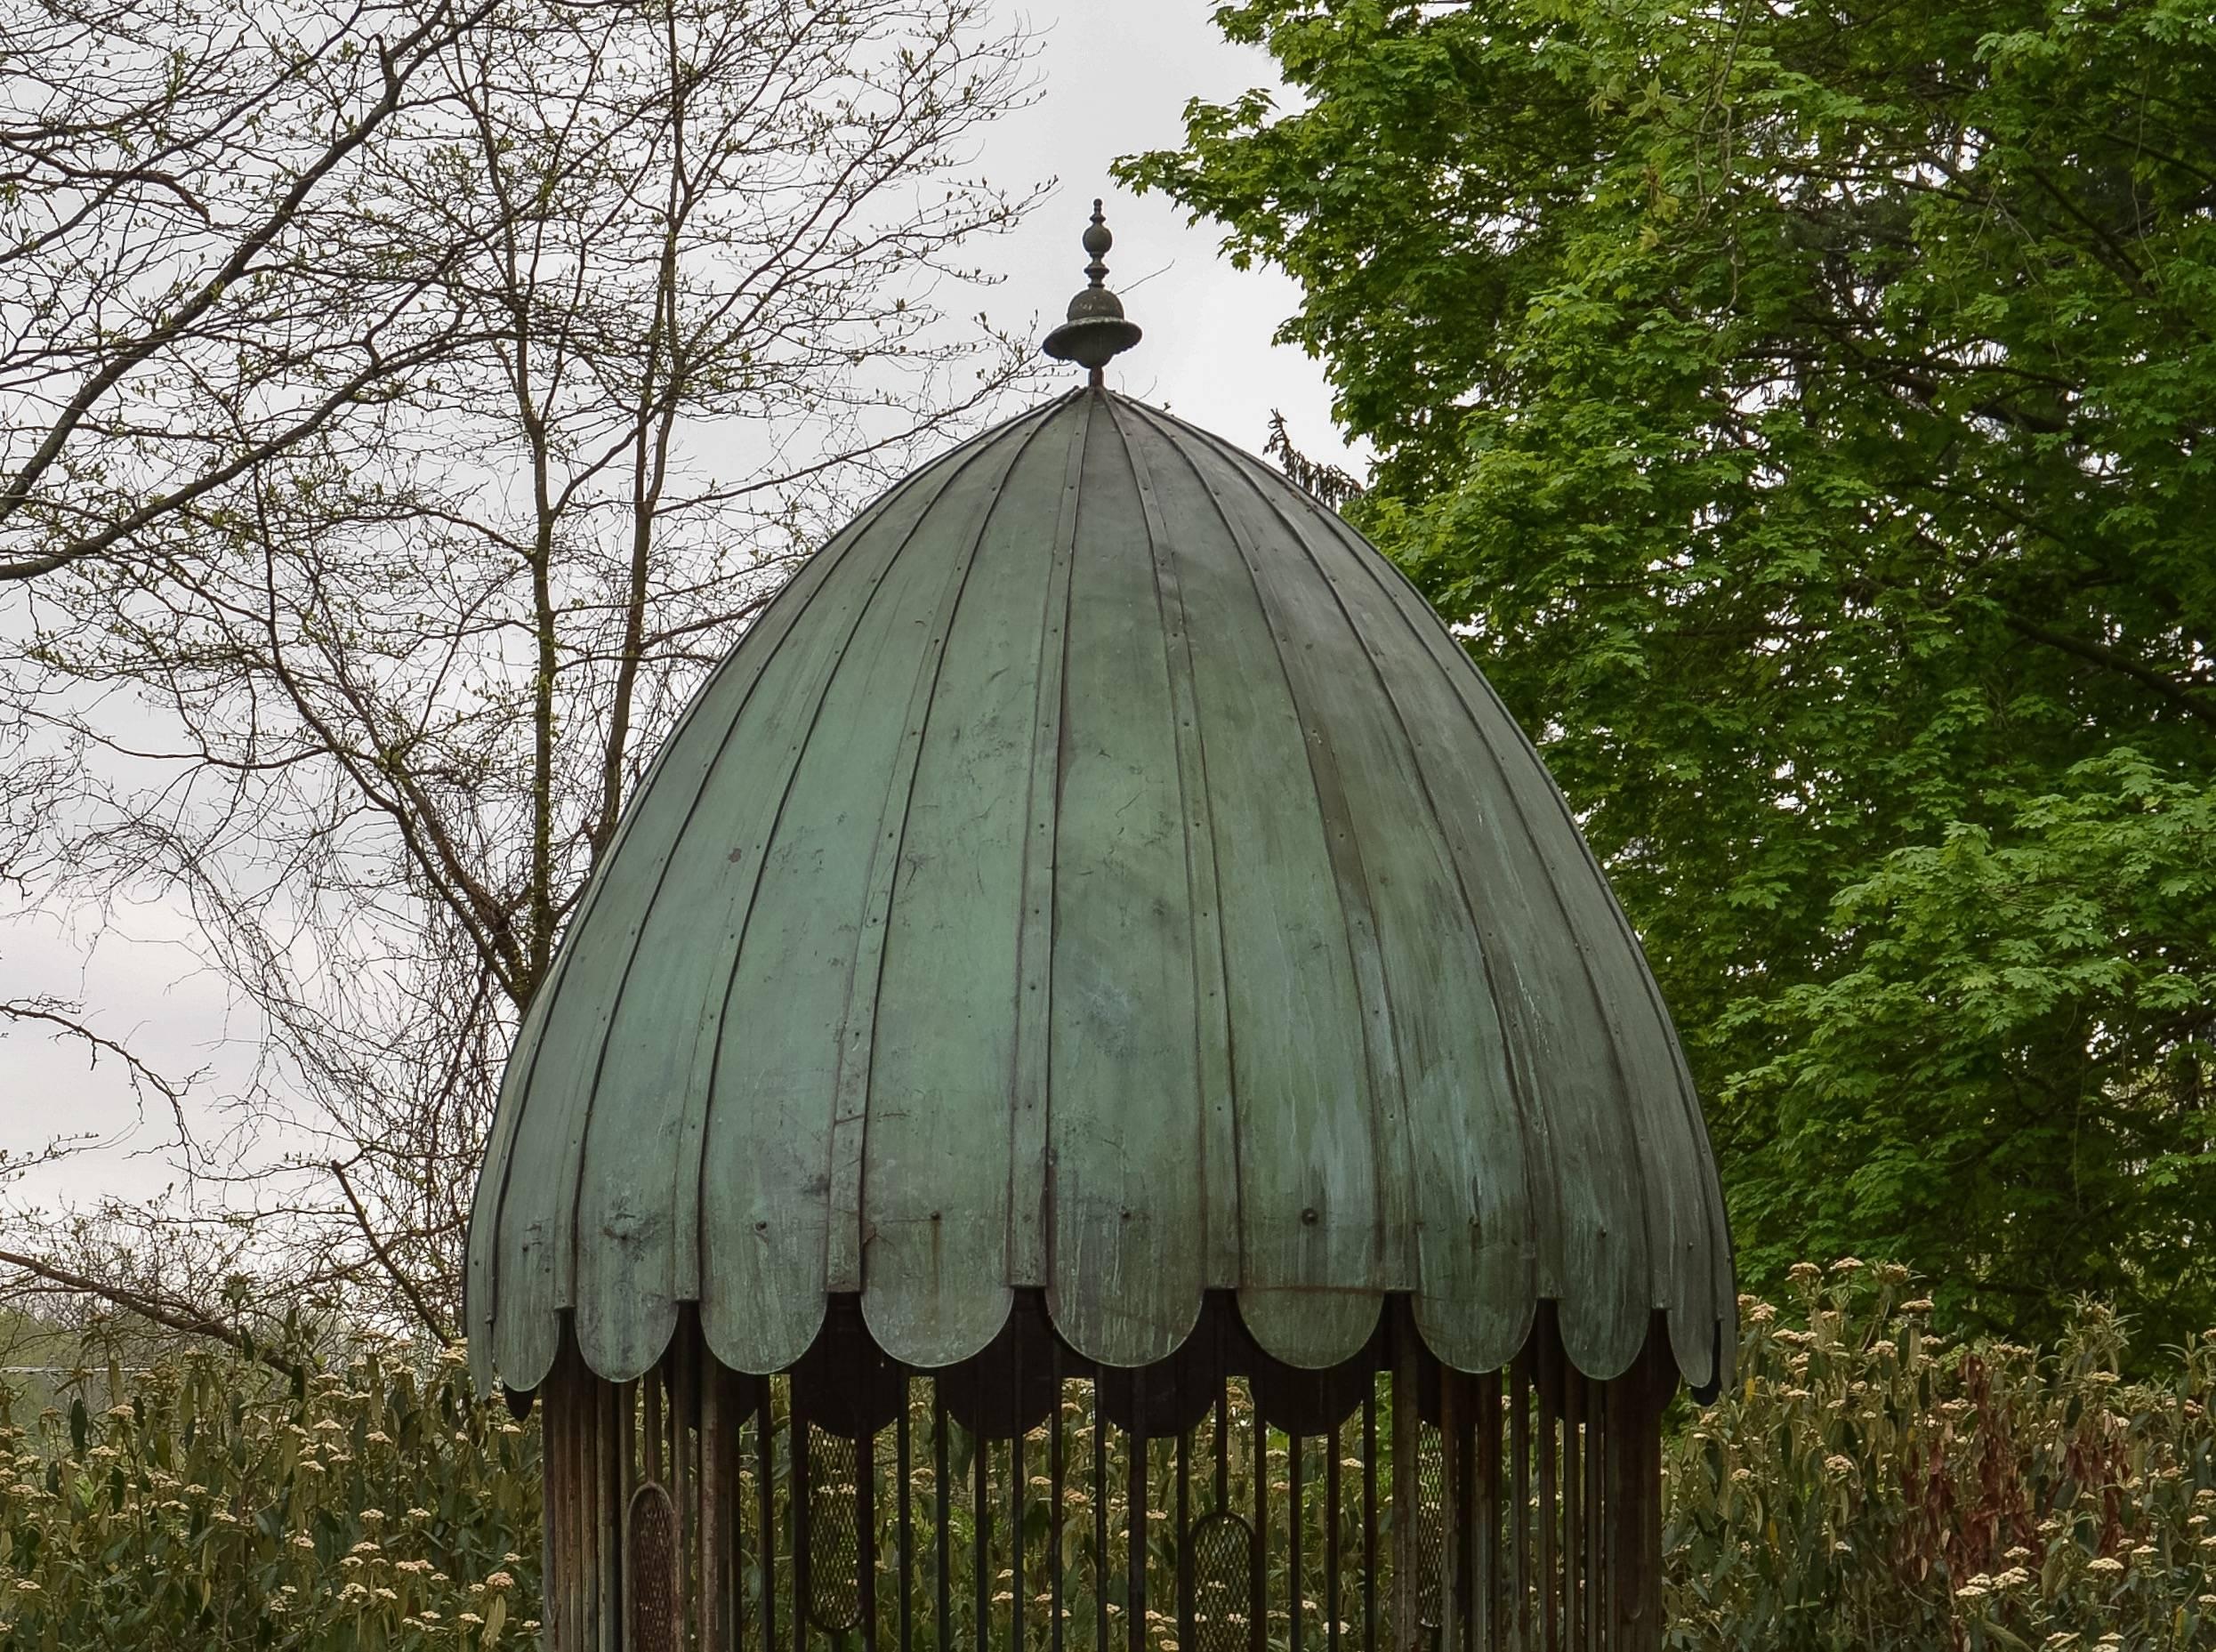 Gazebo with Copper Roof and Wrought-Iron Elements 1